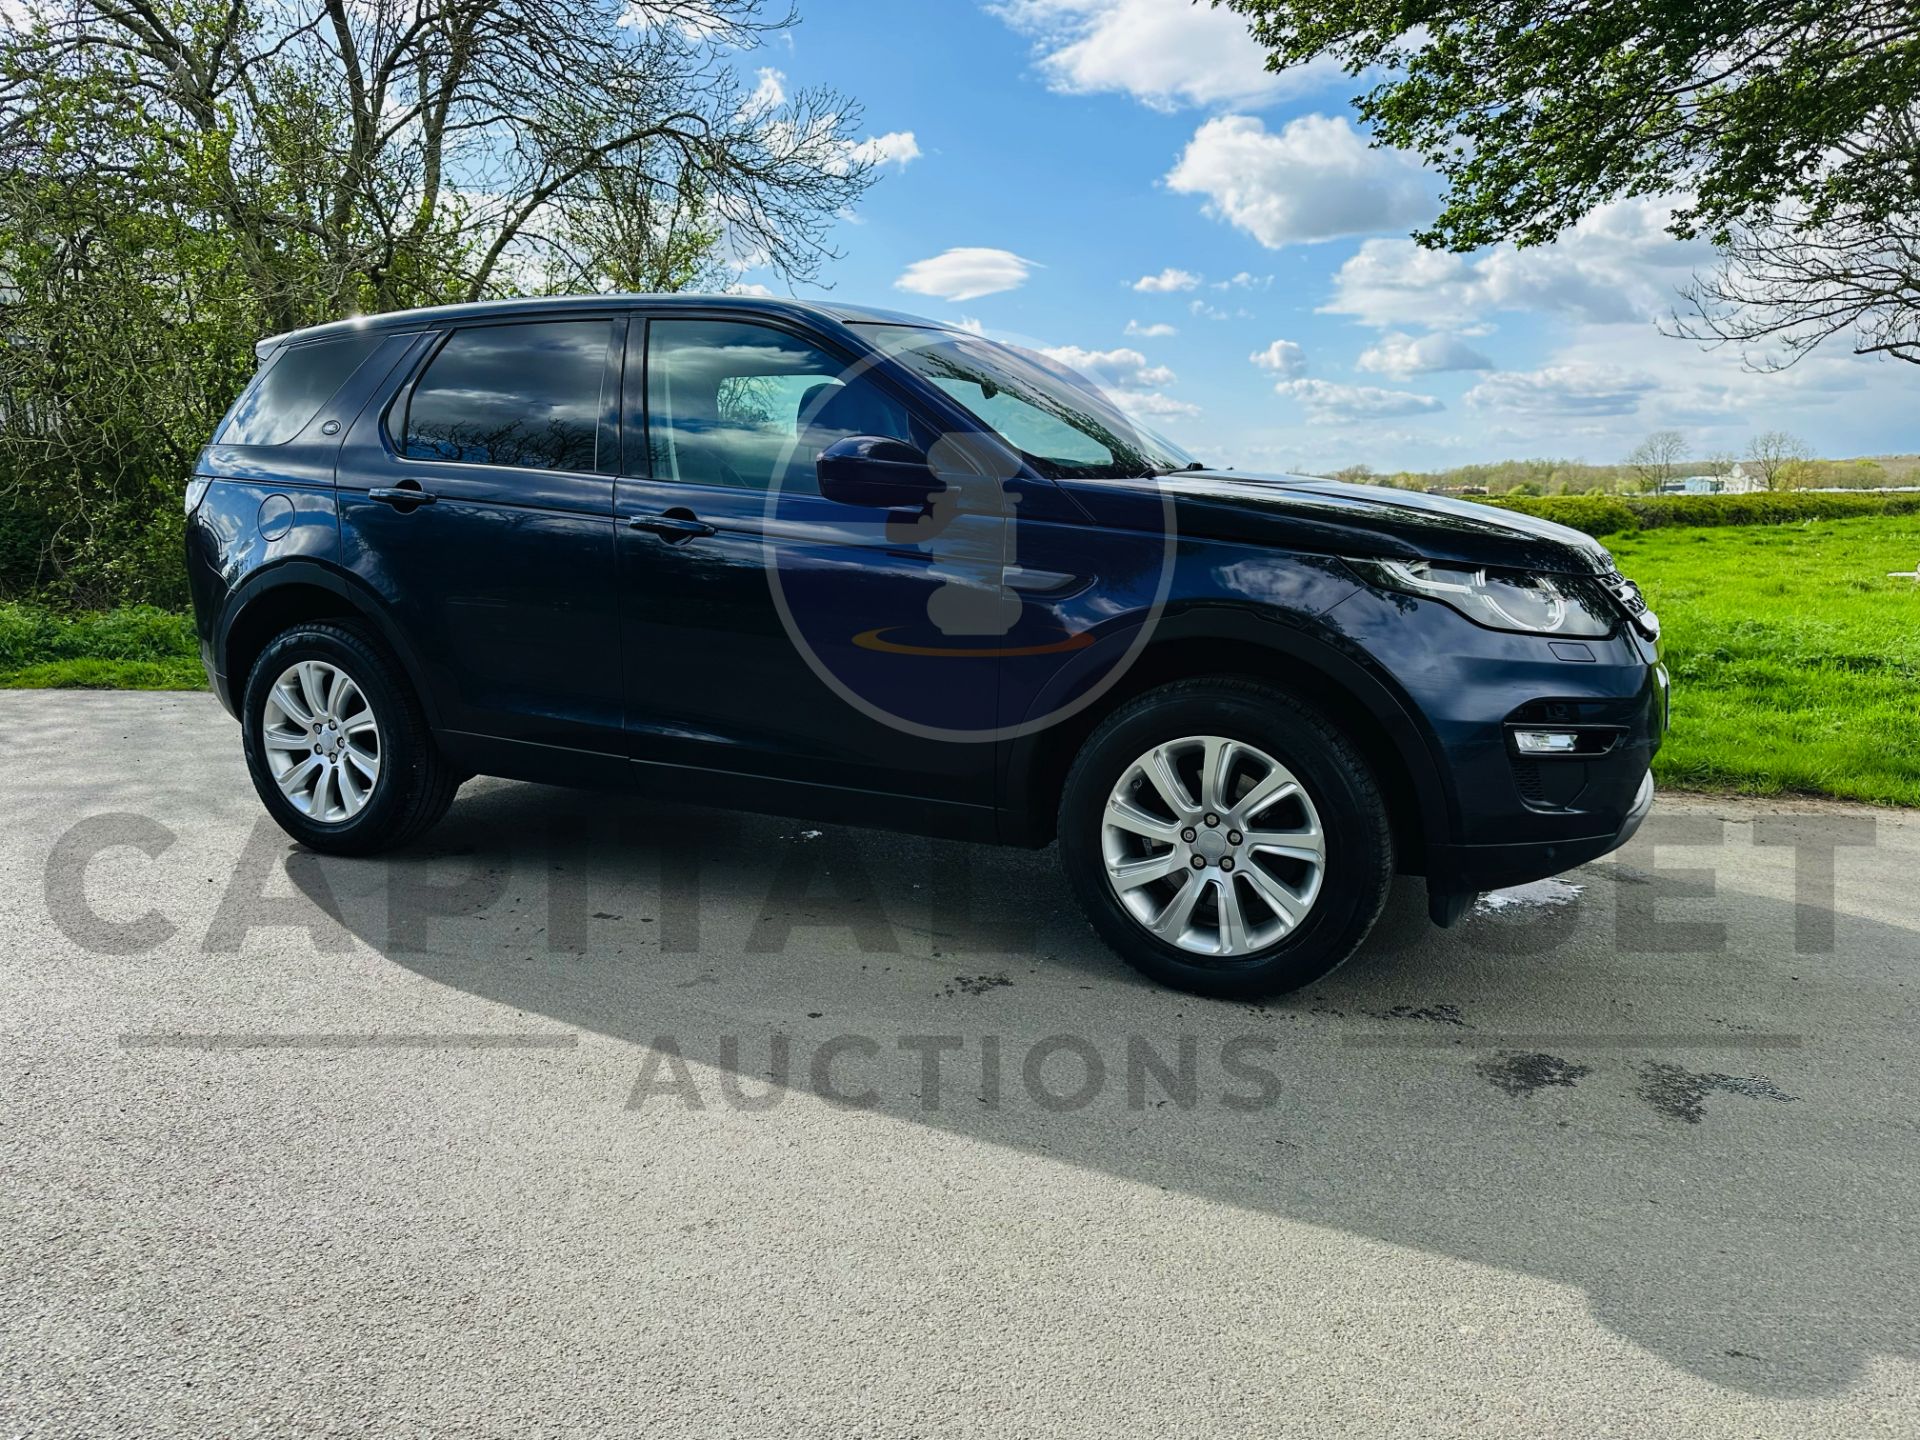 (ON SALE) LAND ROVER DISCOVERY SPORT *SE TECH* 7 SEATER SUV (2016 - EURO 6) 2.0 TD4 - (NO VAT)